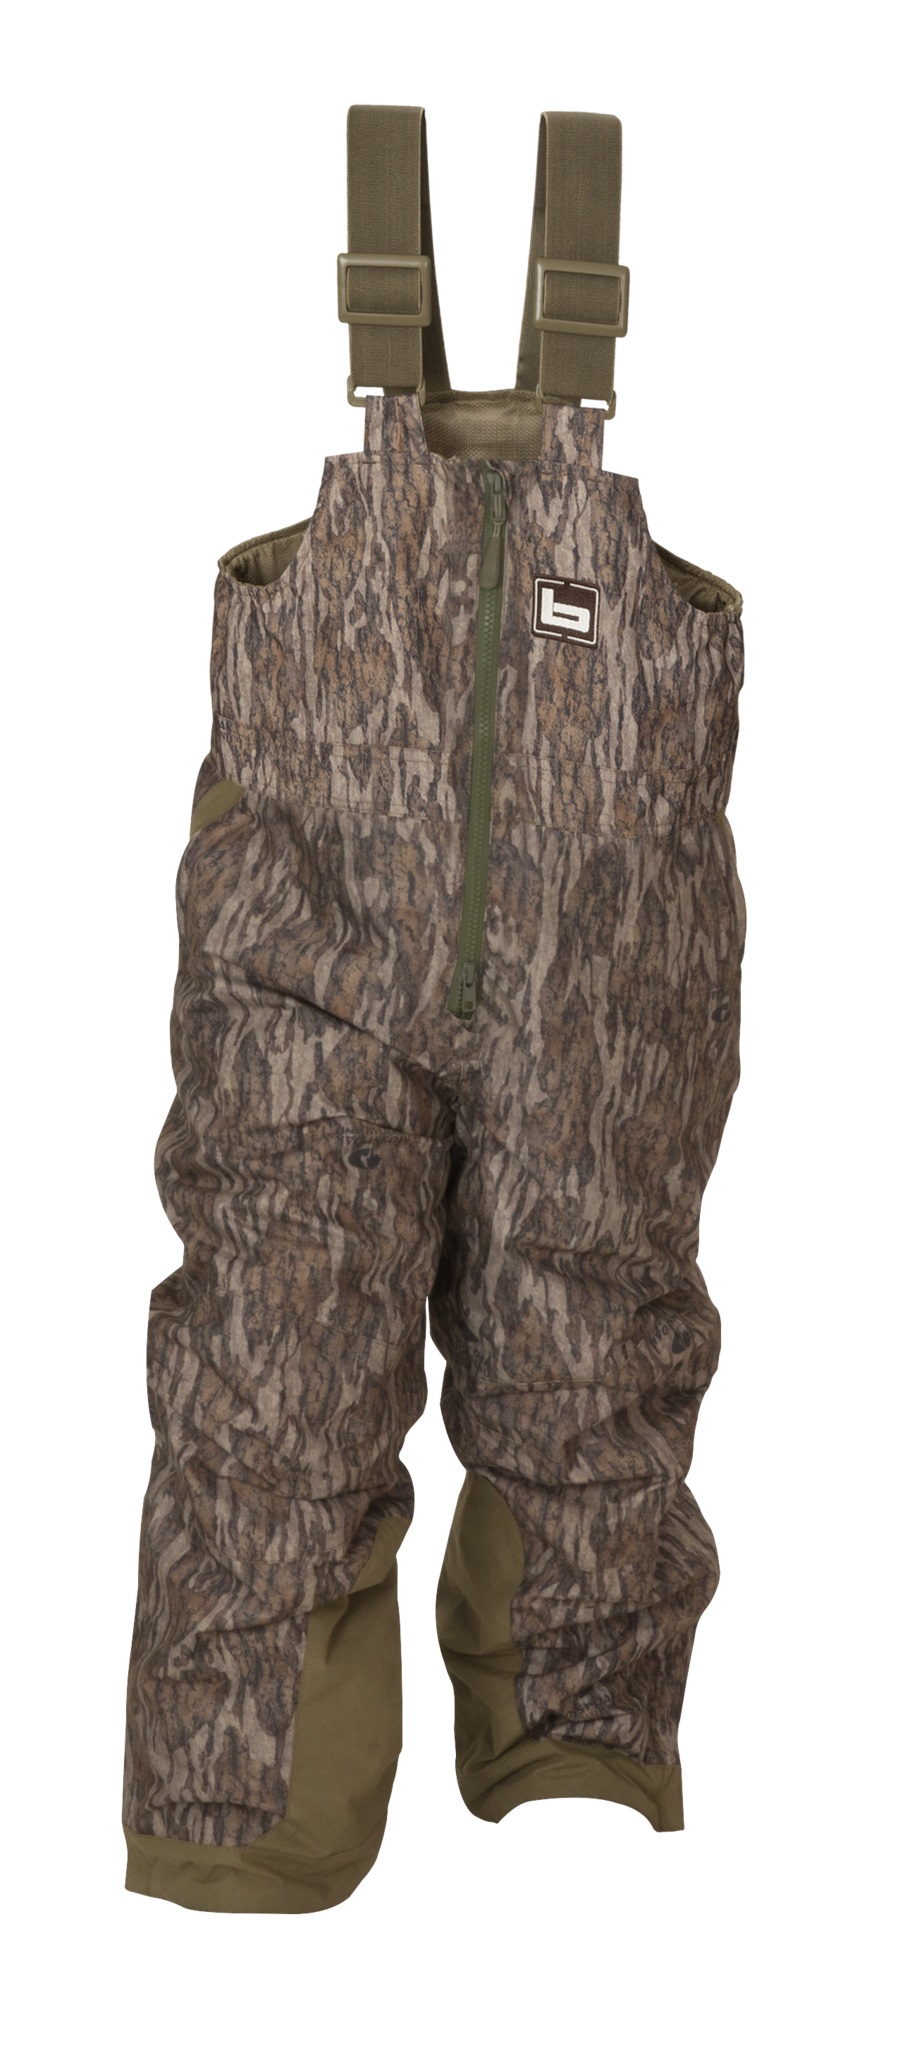 NEW BANDED GEAR SQUAW CREEK INSULATED CAMO HUNTING BIBS 